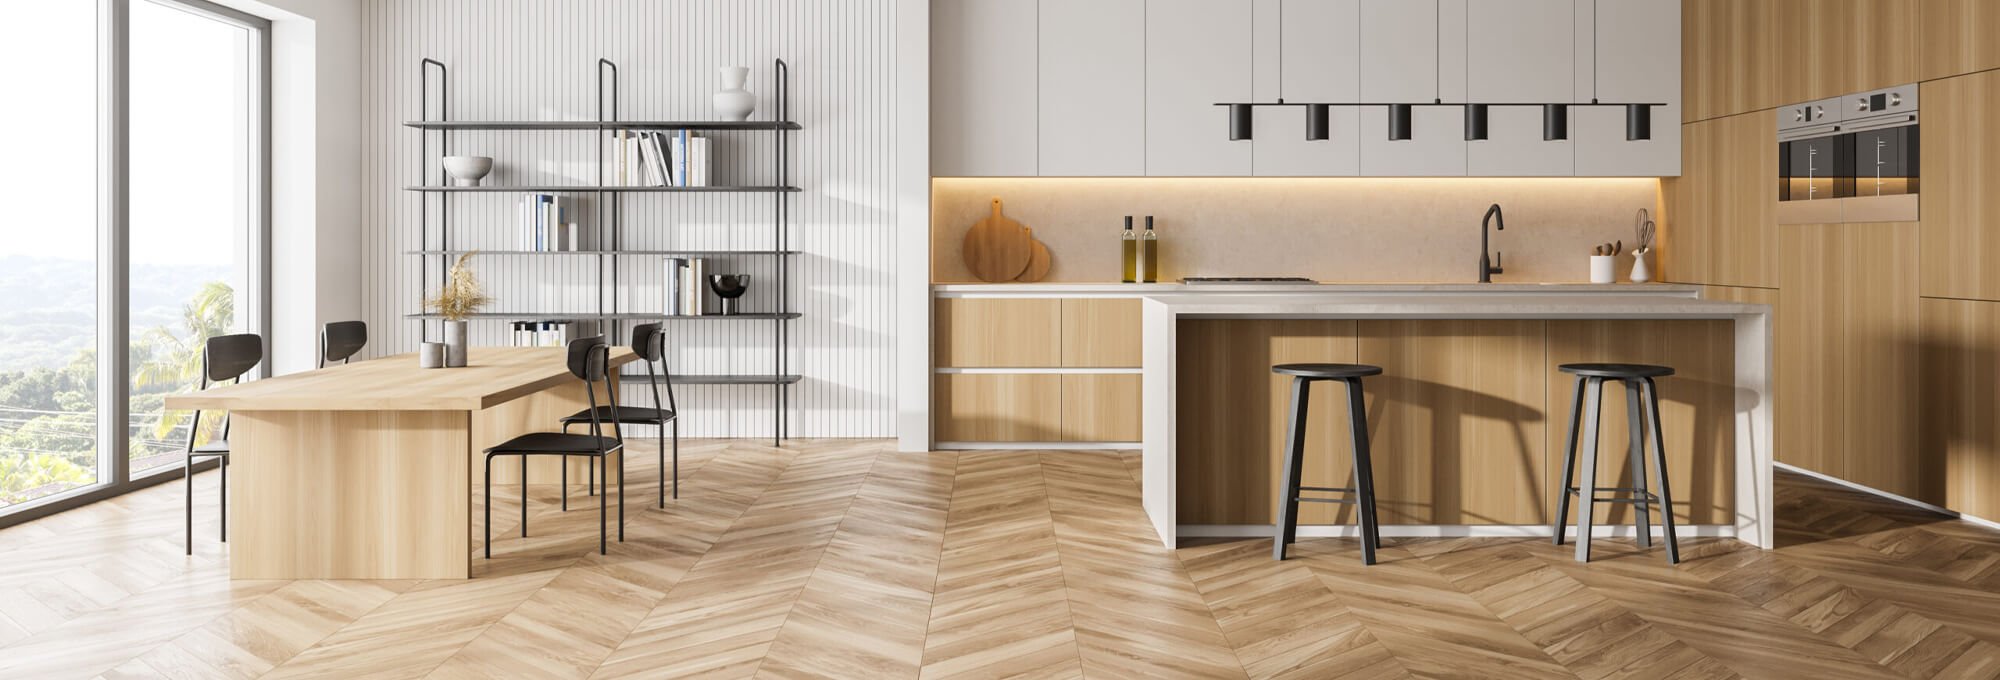 Shop Flooring Products from Middle Georgia Tile Company inDublin